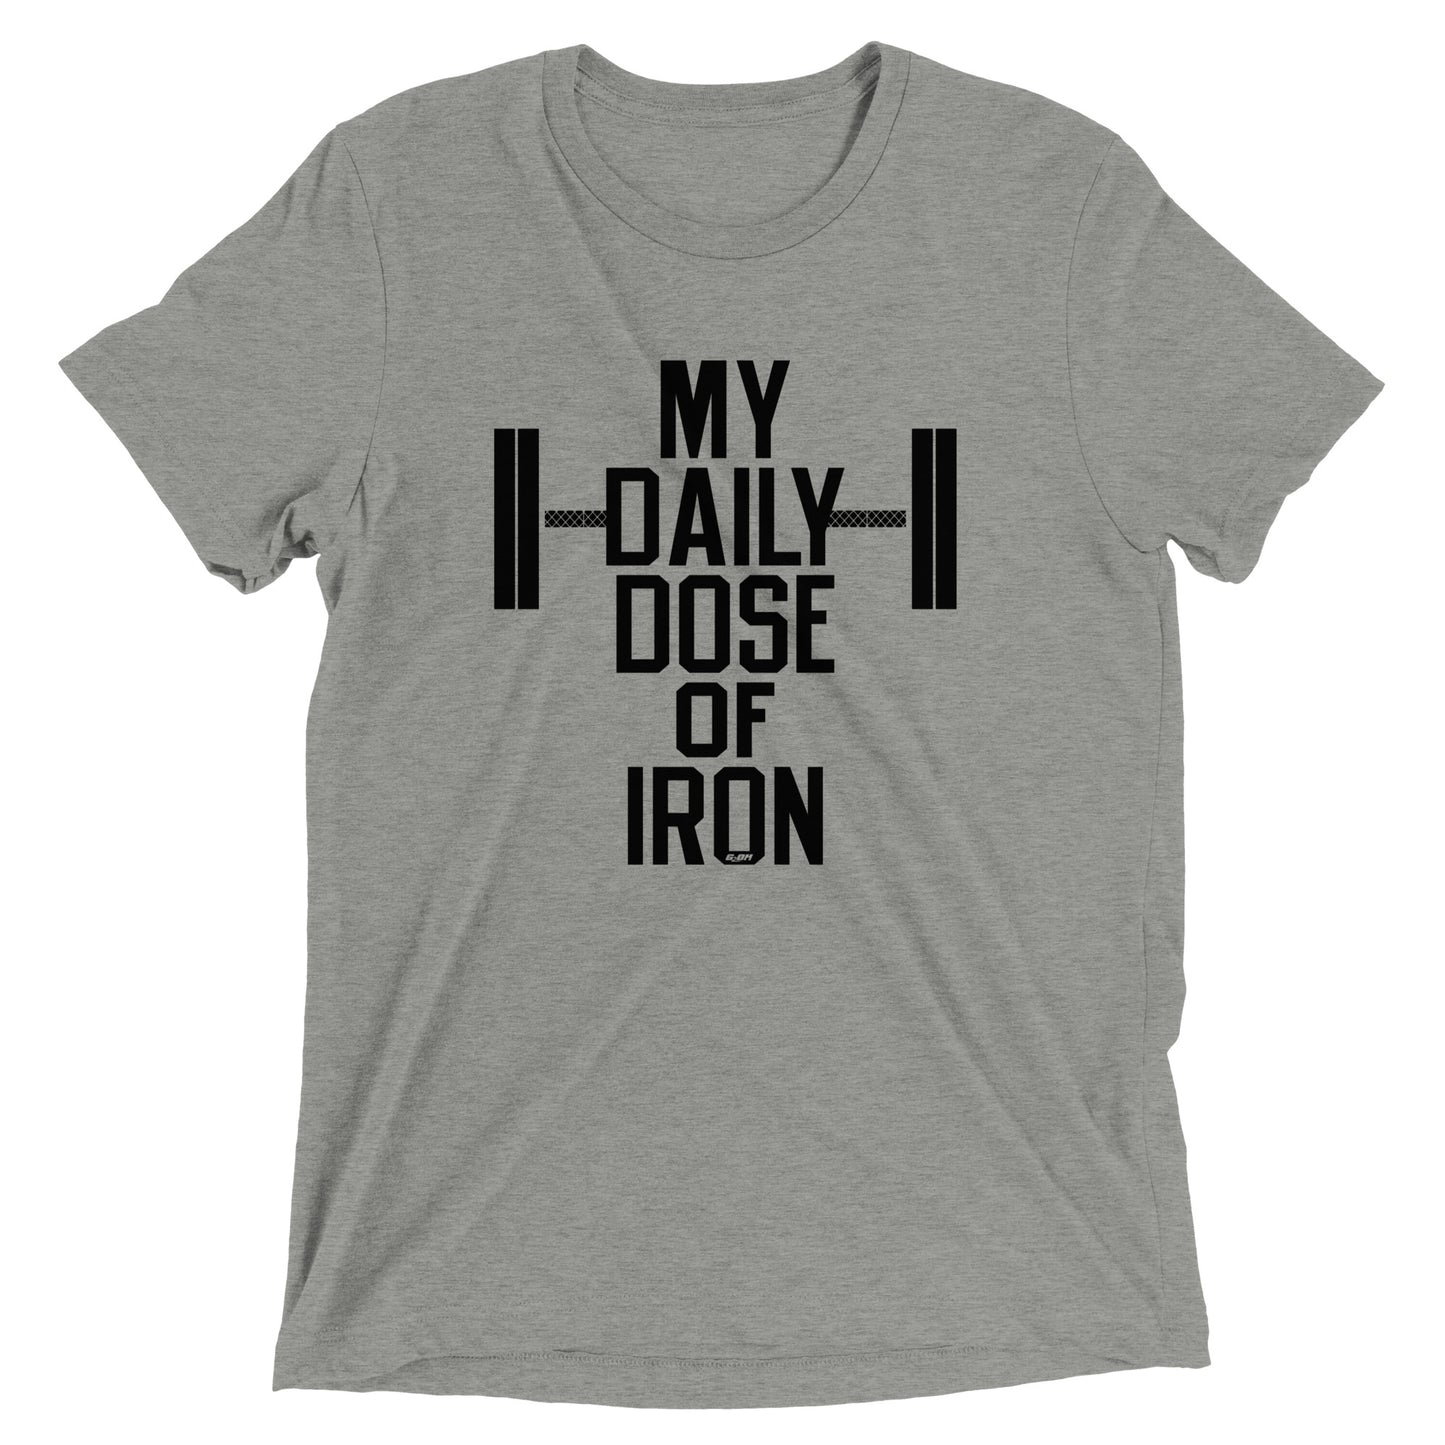 My Daily Dose Of Iron Men's T-Shirt